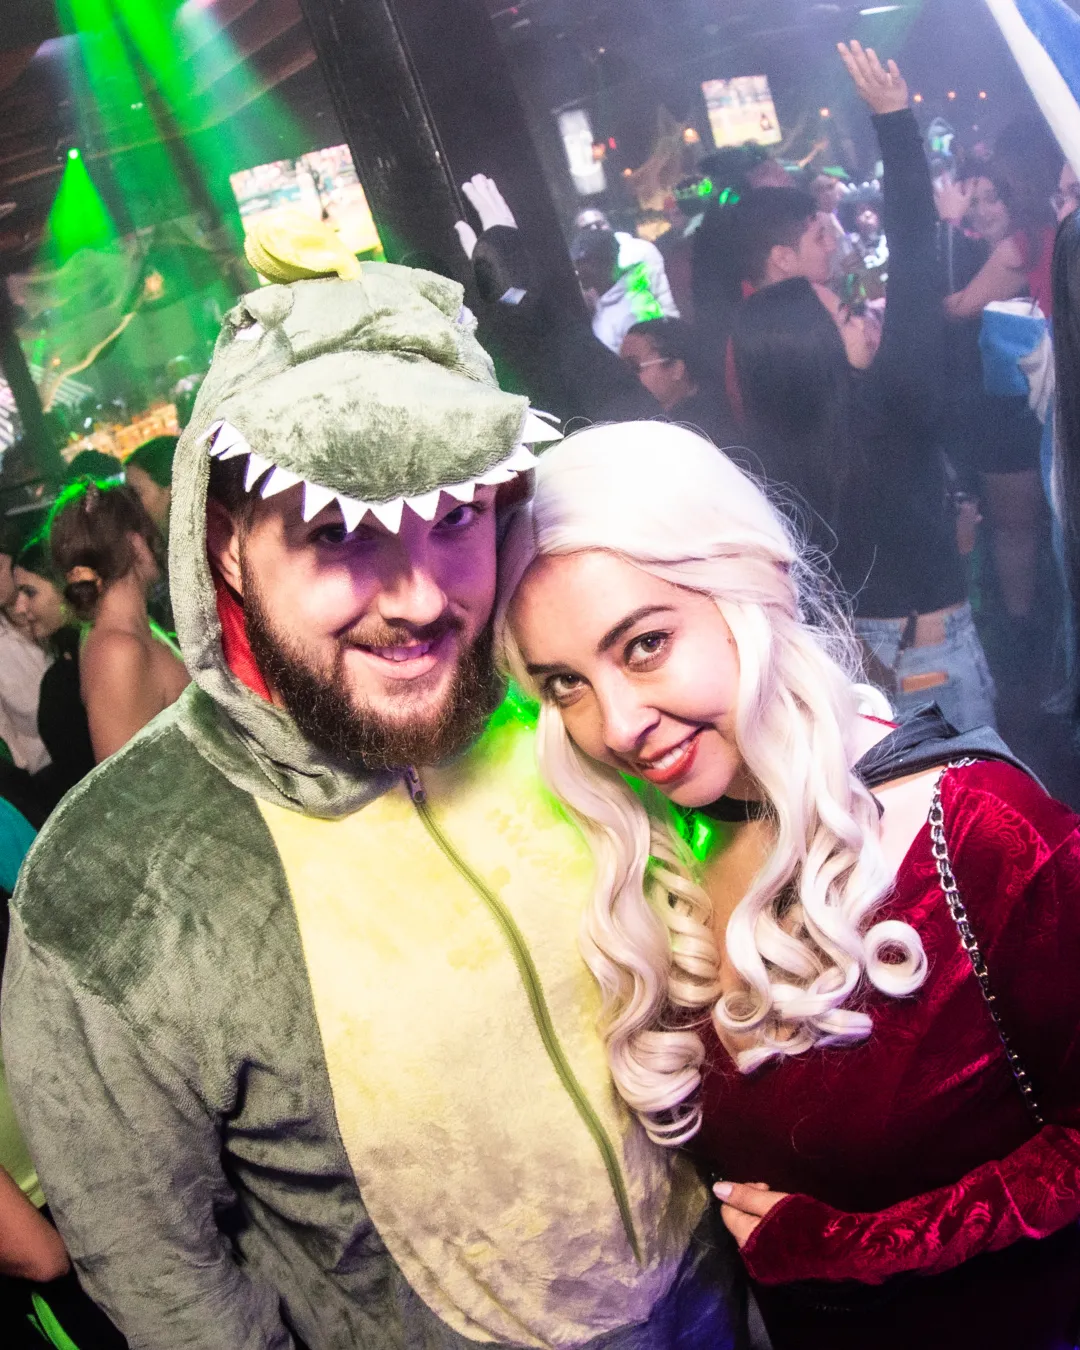 A motley crew of two dressed in creative costumes embodying the iconic Khaleesi and her dragon from The Game Of Thrones tv series amid the Halloween bar crawl crowd
